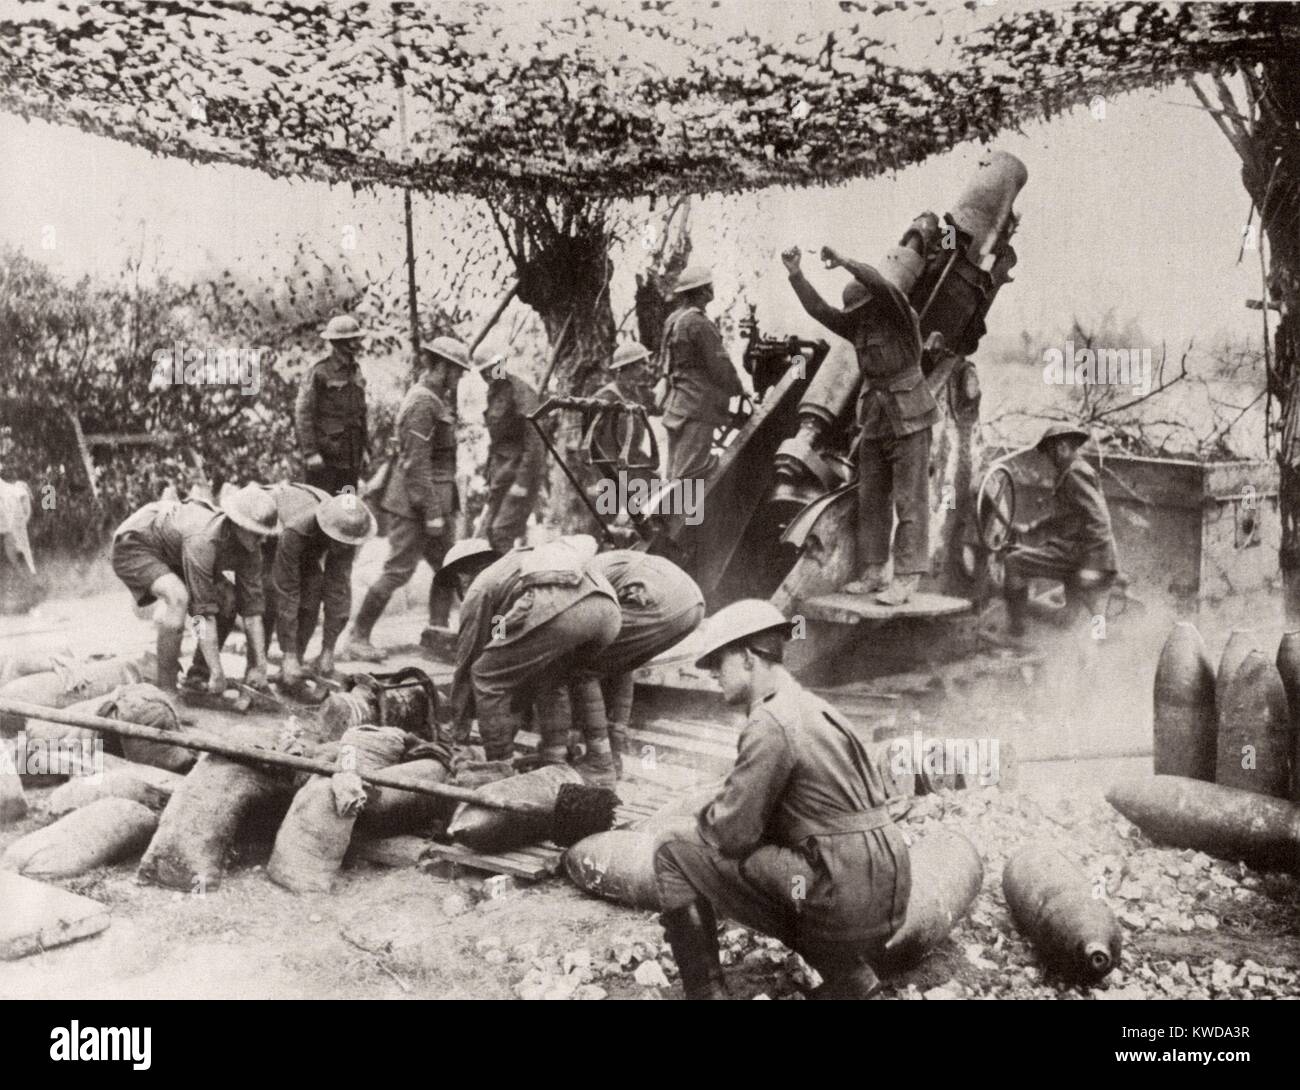 World War 1. Australians firing a 9.2 inch Howitzer out of the Ypres salient during the Battle of Passchendaele. I threw a 380 lb. shell up to 26,000 yards (14.7 miles). The firing lanyard has just been pulled and a crew is waiting to reload. The screen above camouflages the guns position from enemy aircraft. At Vormezeele, Sept 1917. (BSLOC 2013 1 147) Stock Photo